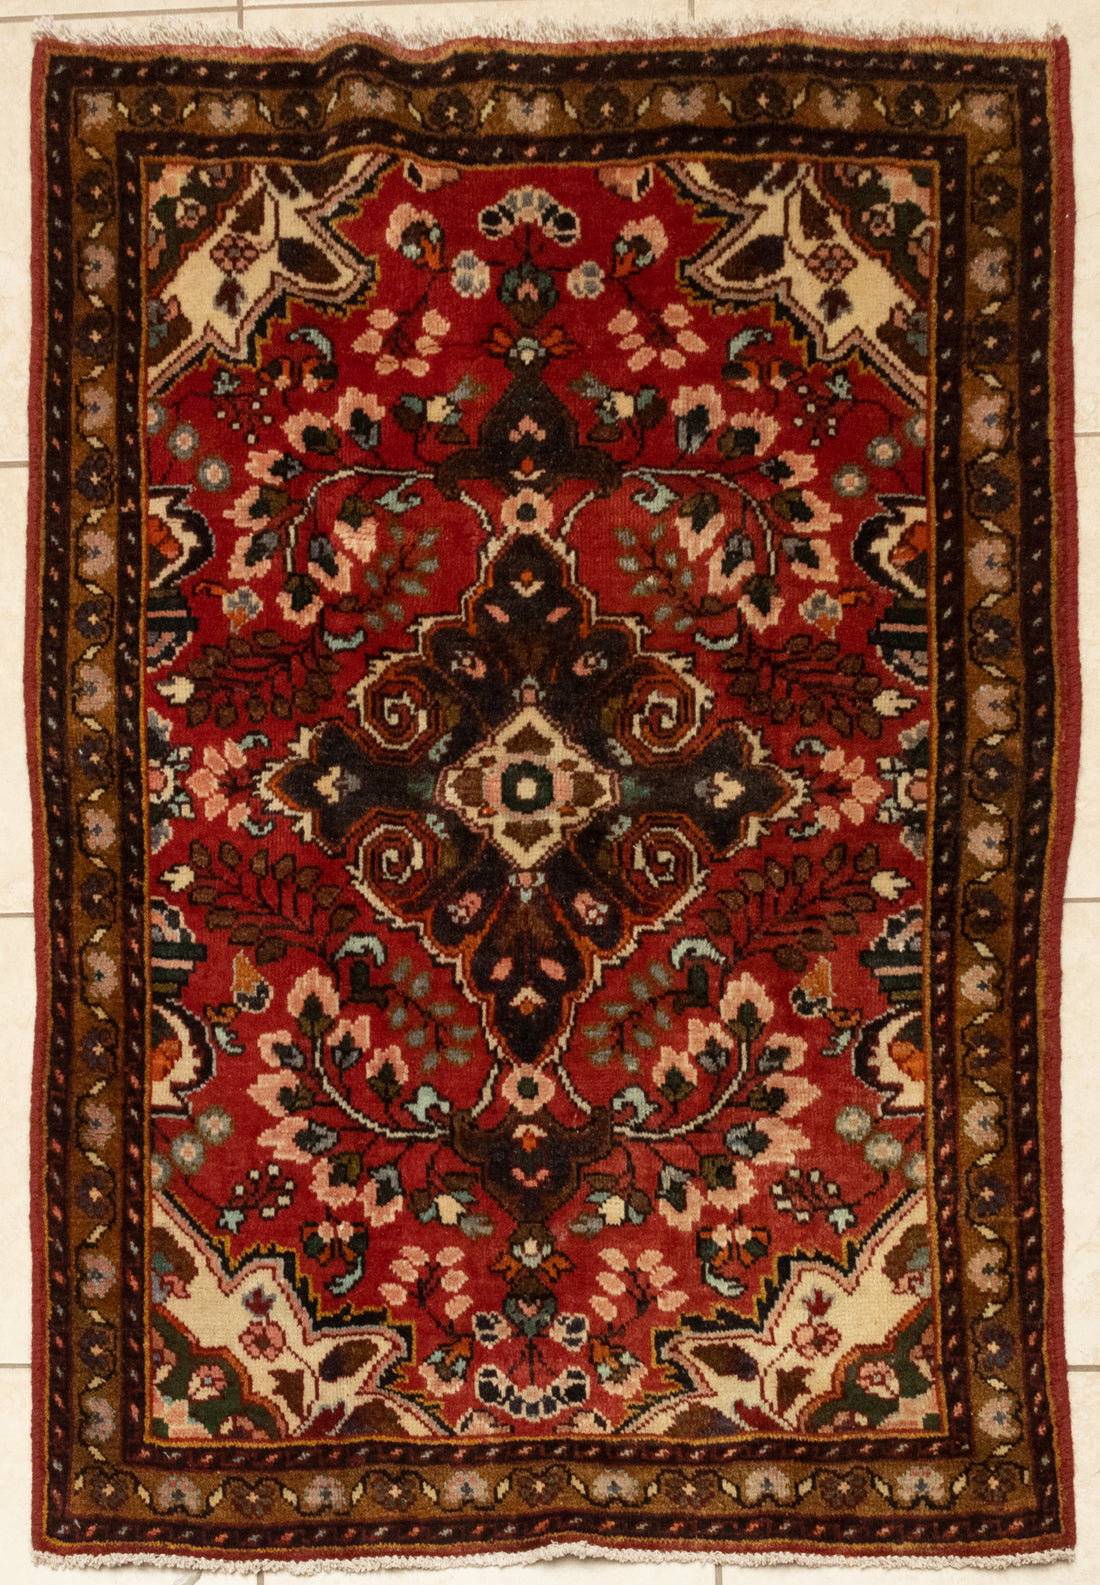 Hand-Knotted Wool Sienna Rug 5'10" x 3'4"